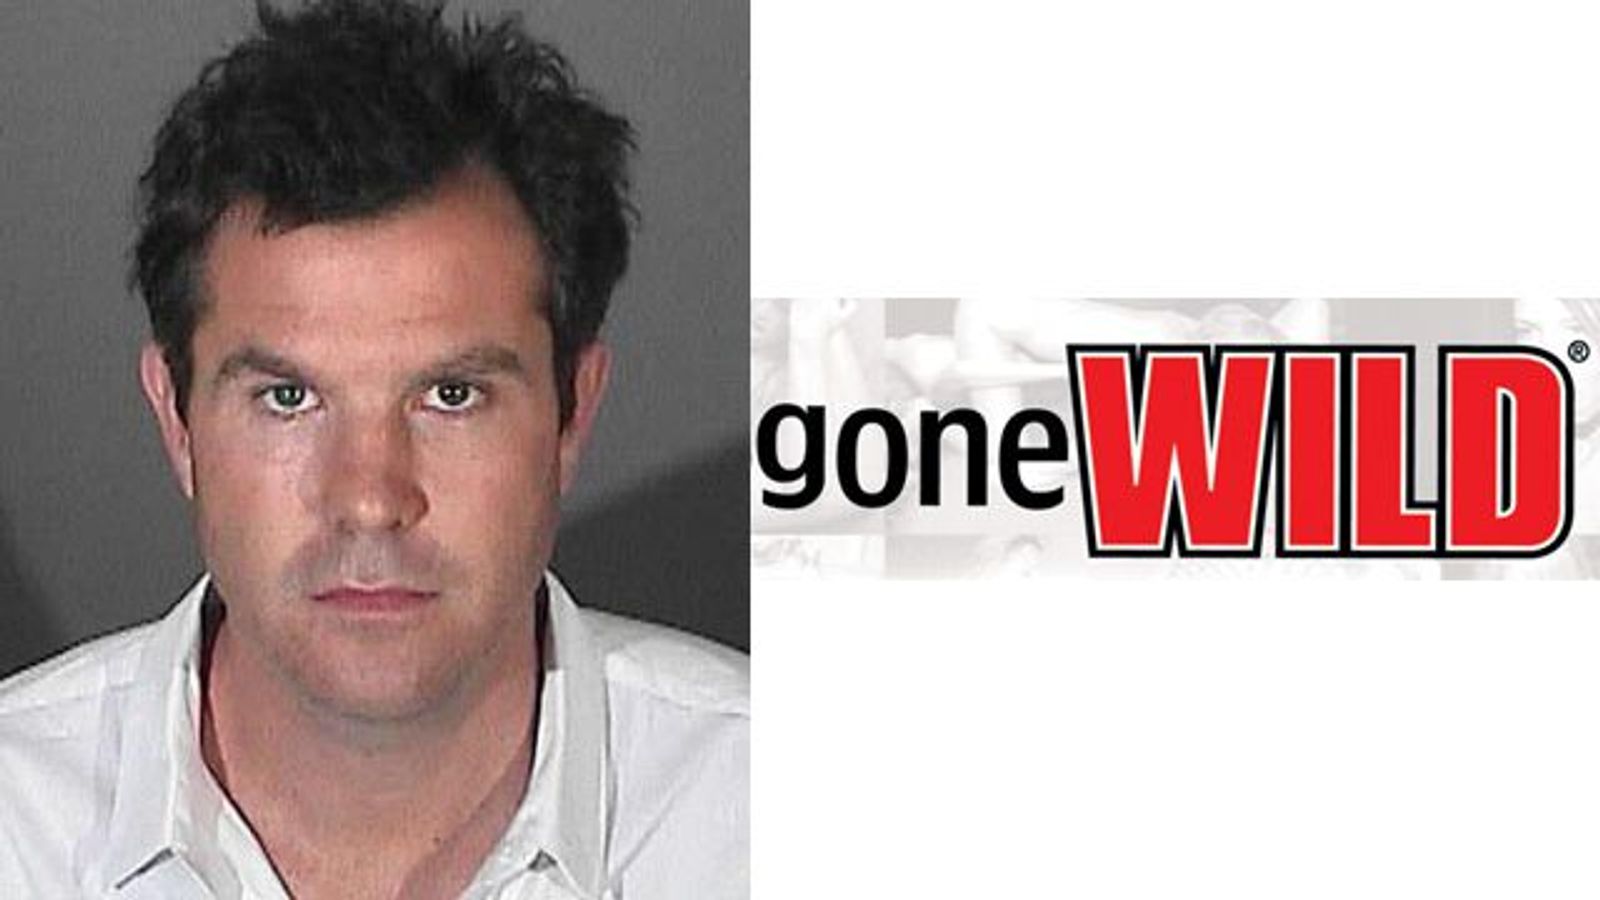 ‘Girls Gone Wild’ Exec Gets a Year in Fatal Hit-and-Run